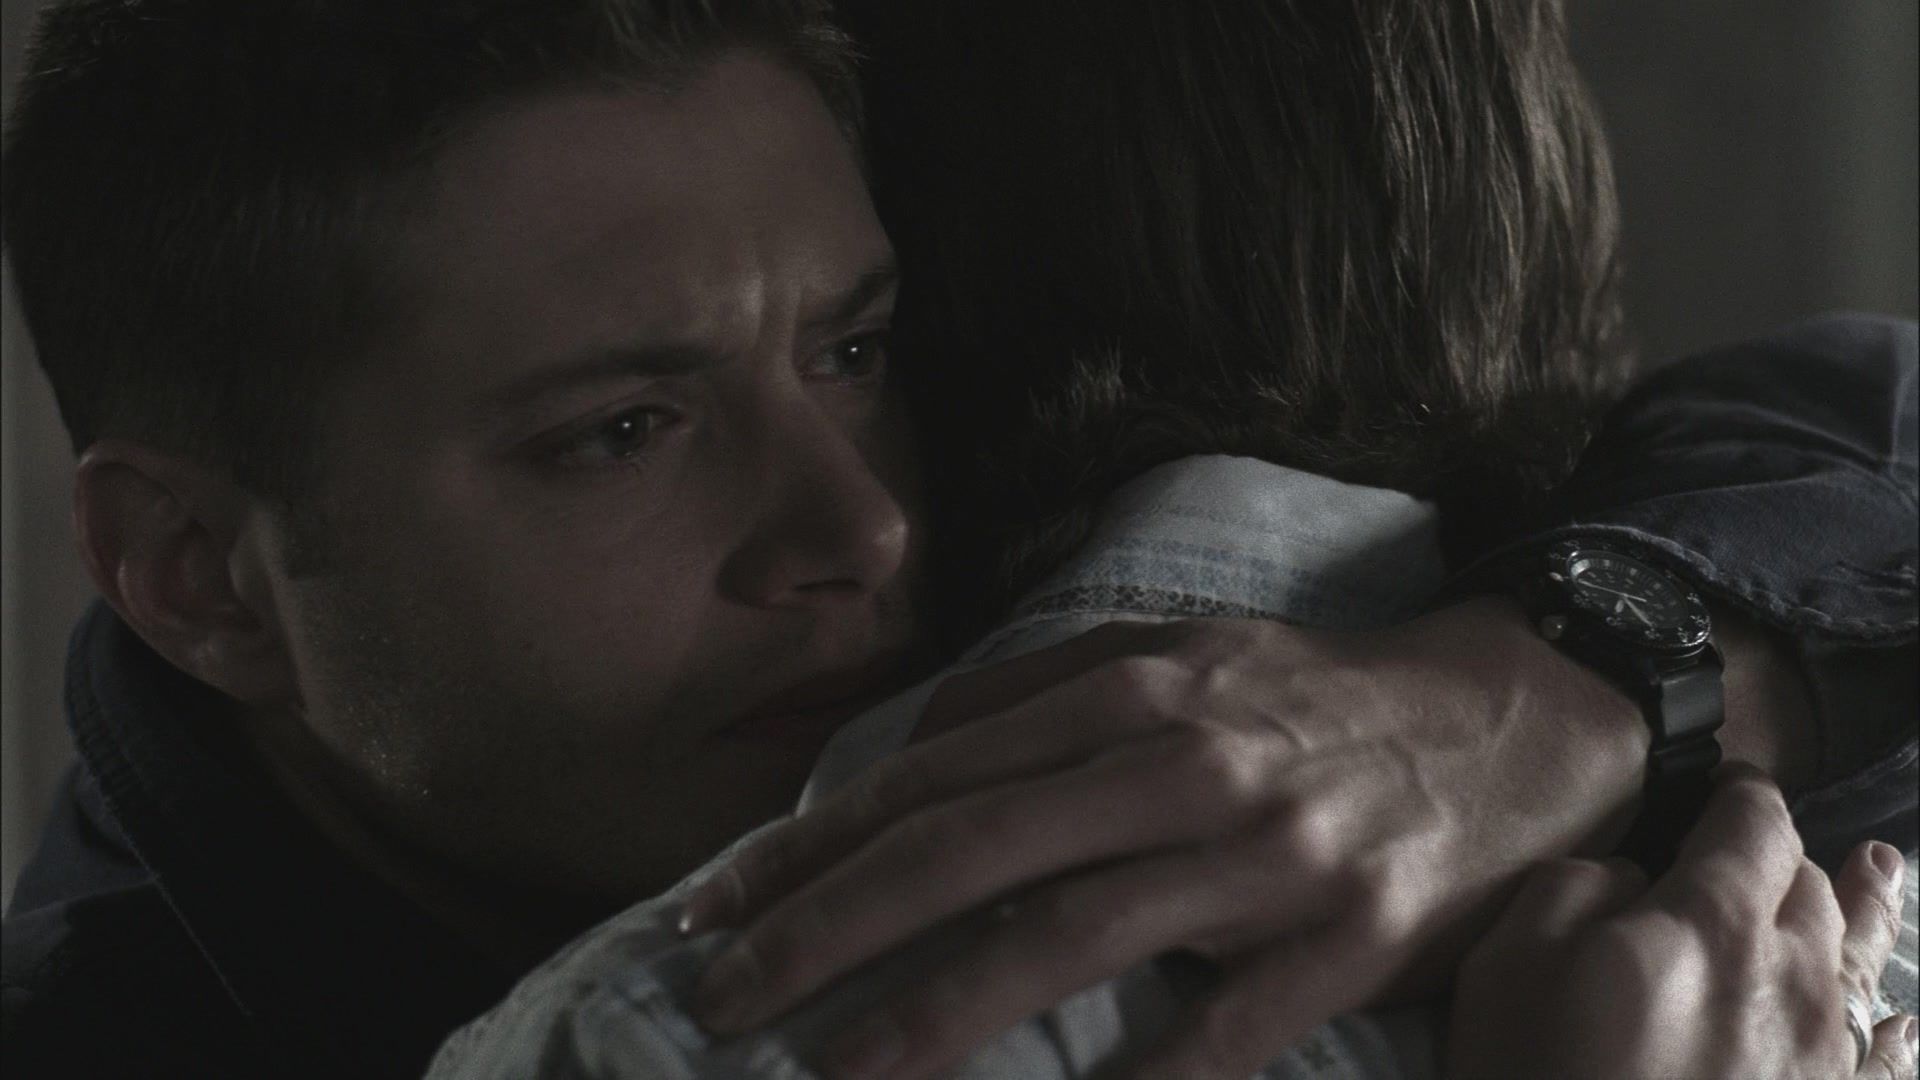 10 Times They Could Have Ended Supernatural